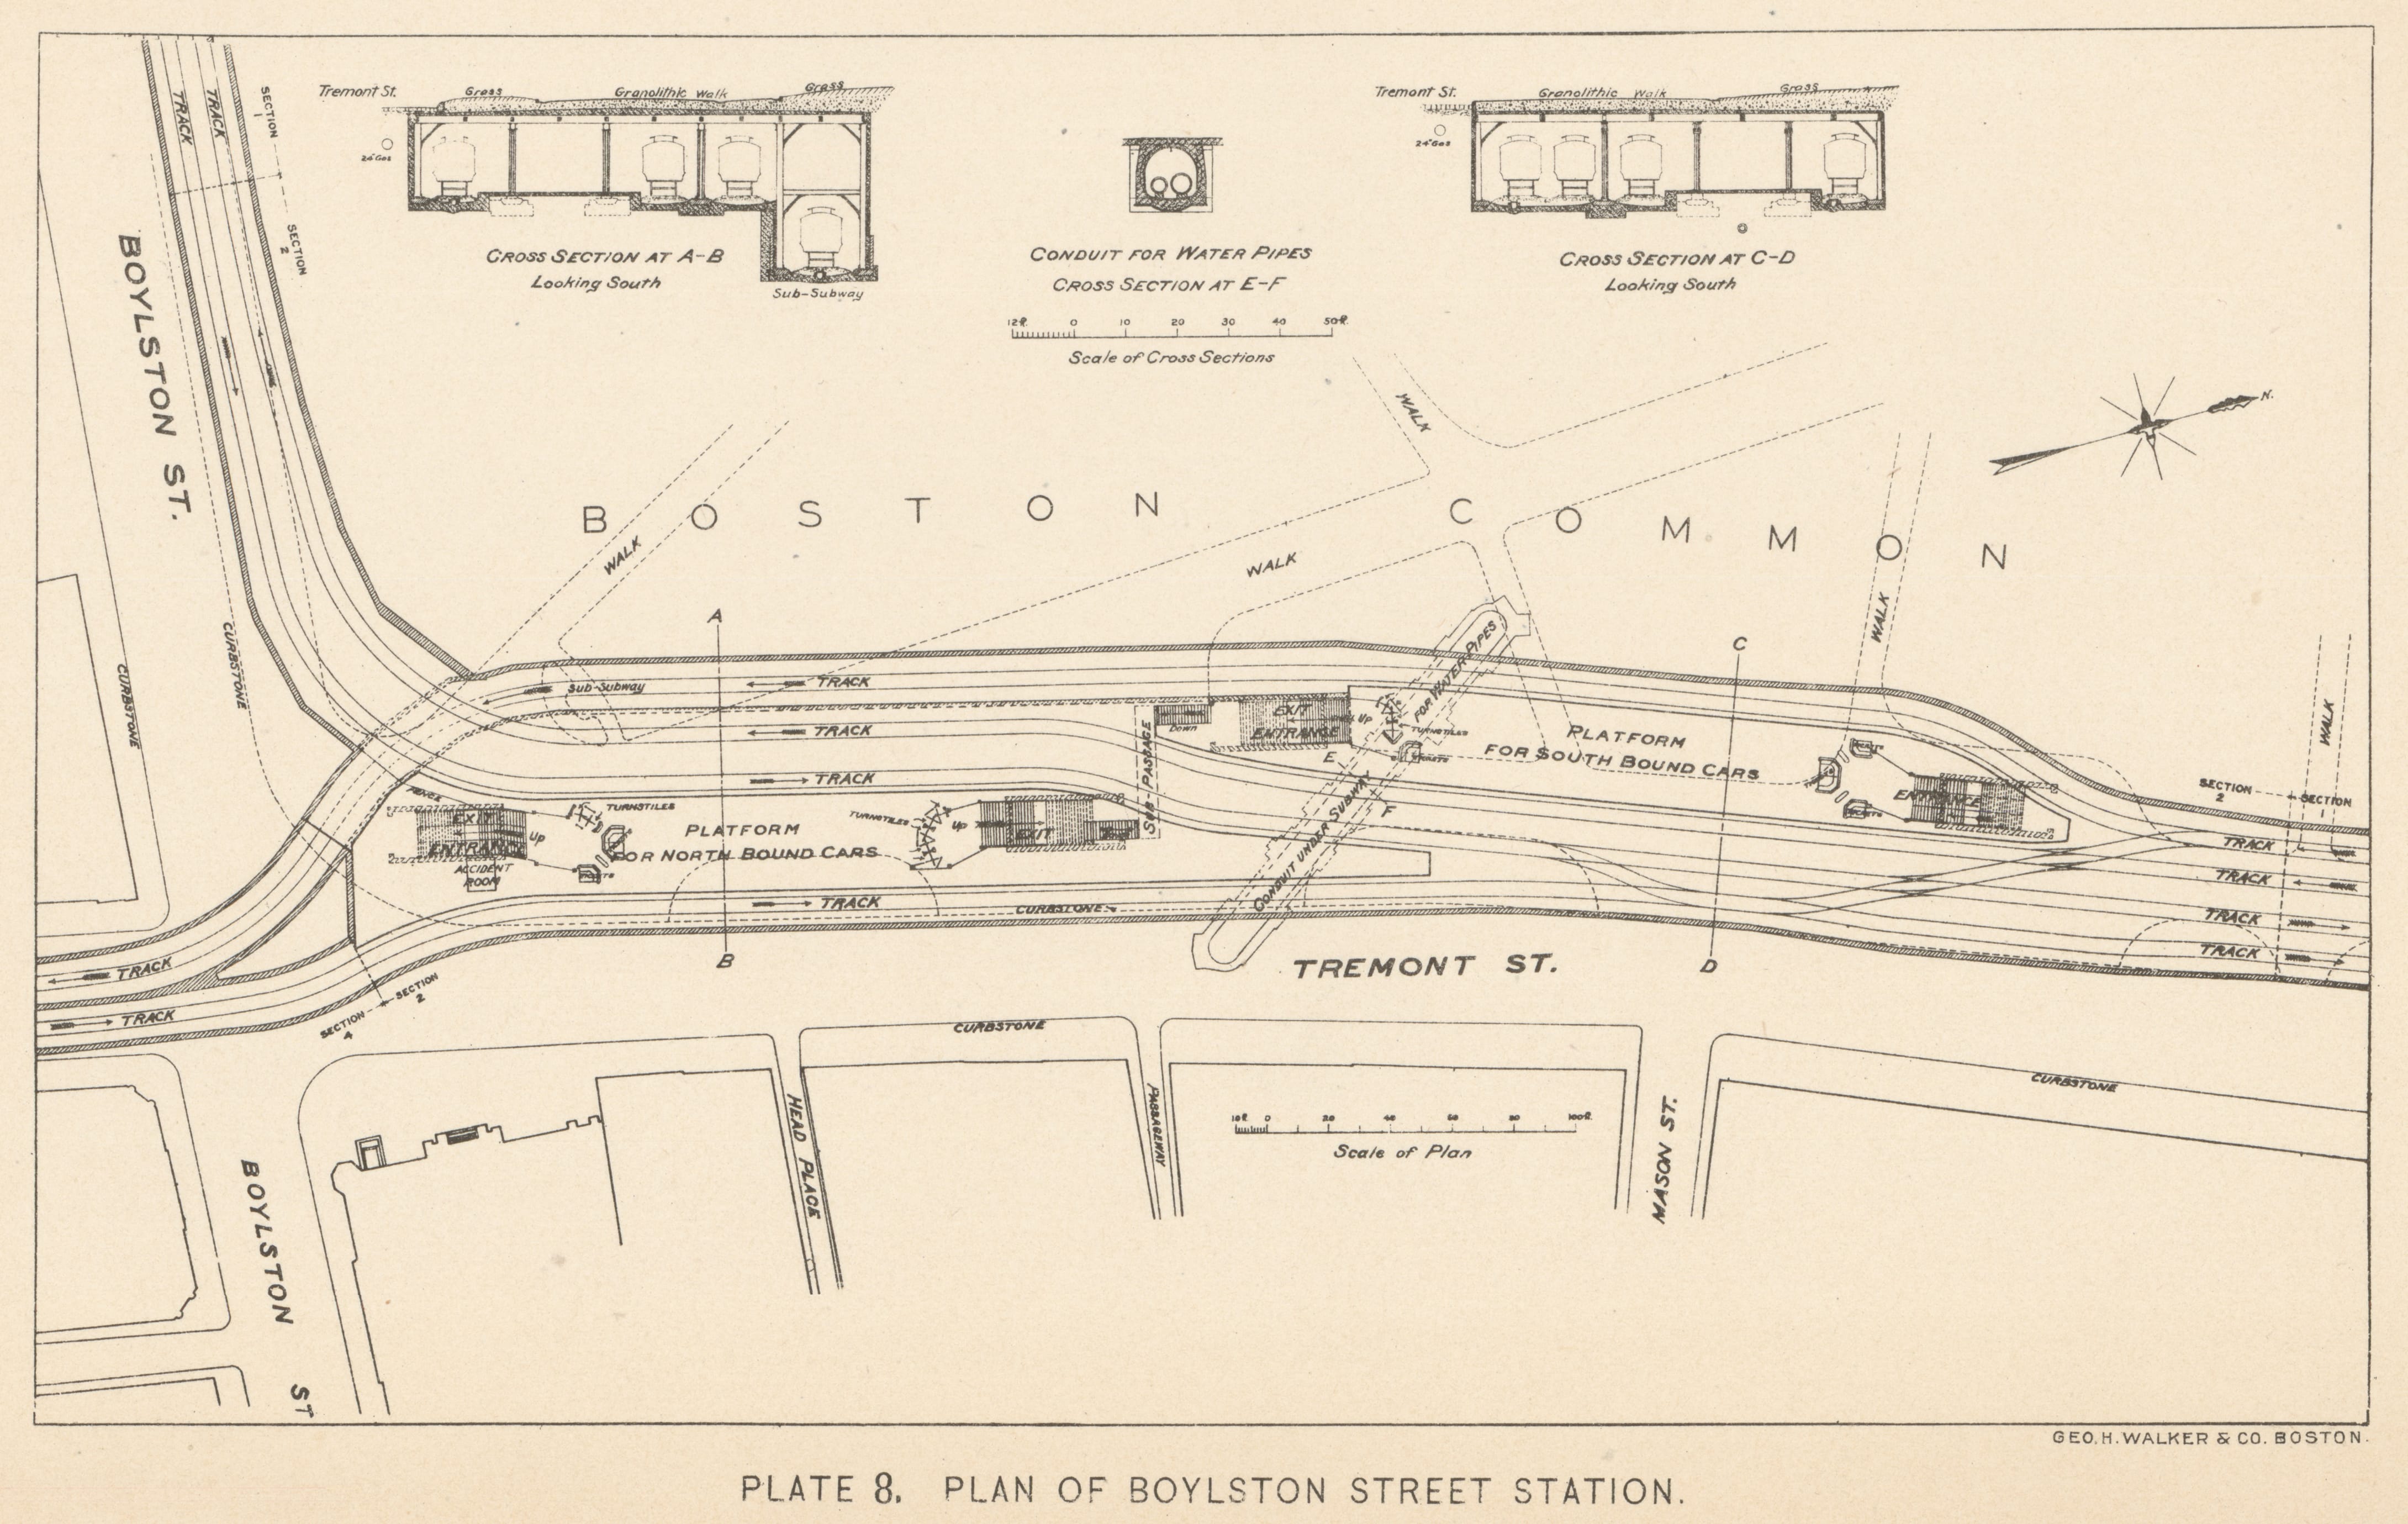 Image of “Plate 8” from “Fourth Annual Report of the Boston Transit Commission”